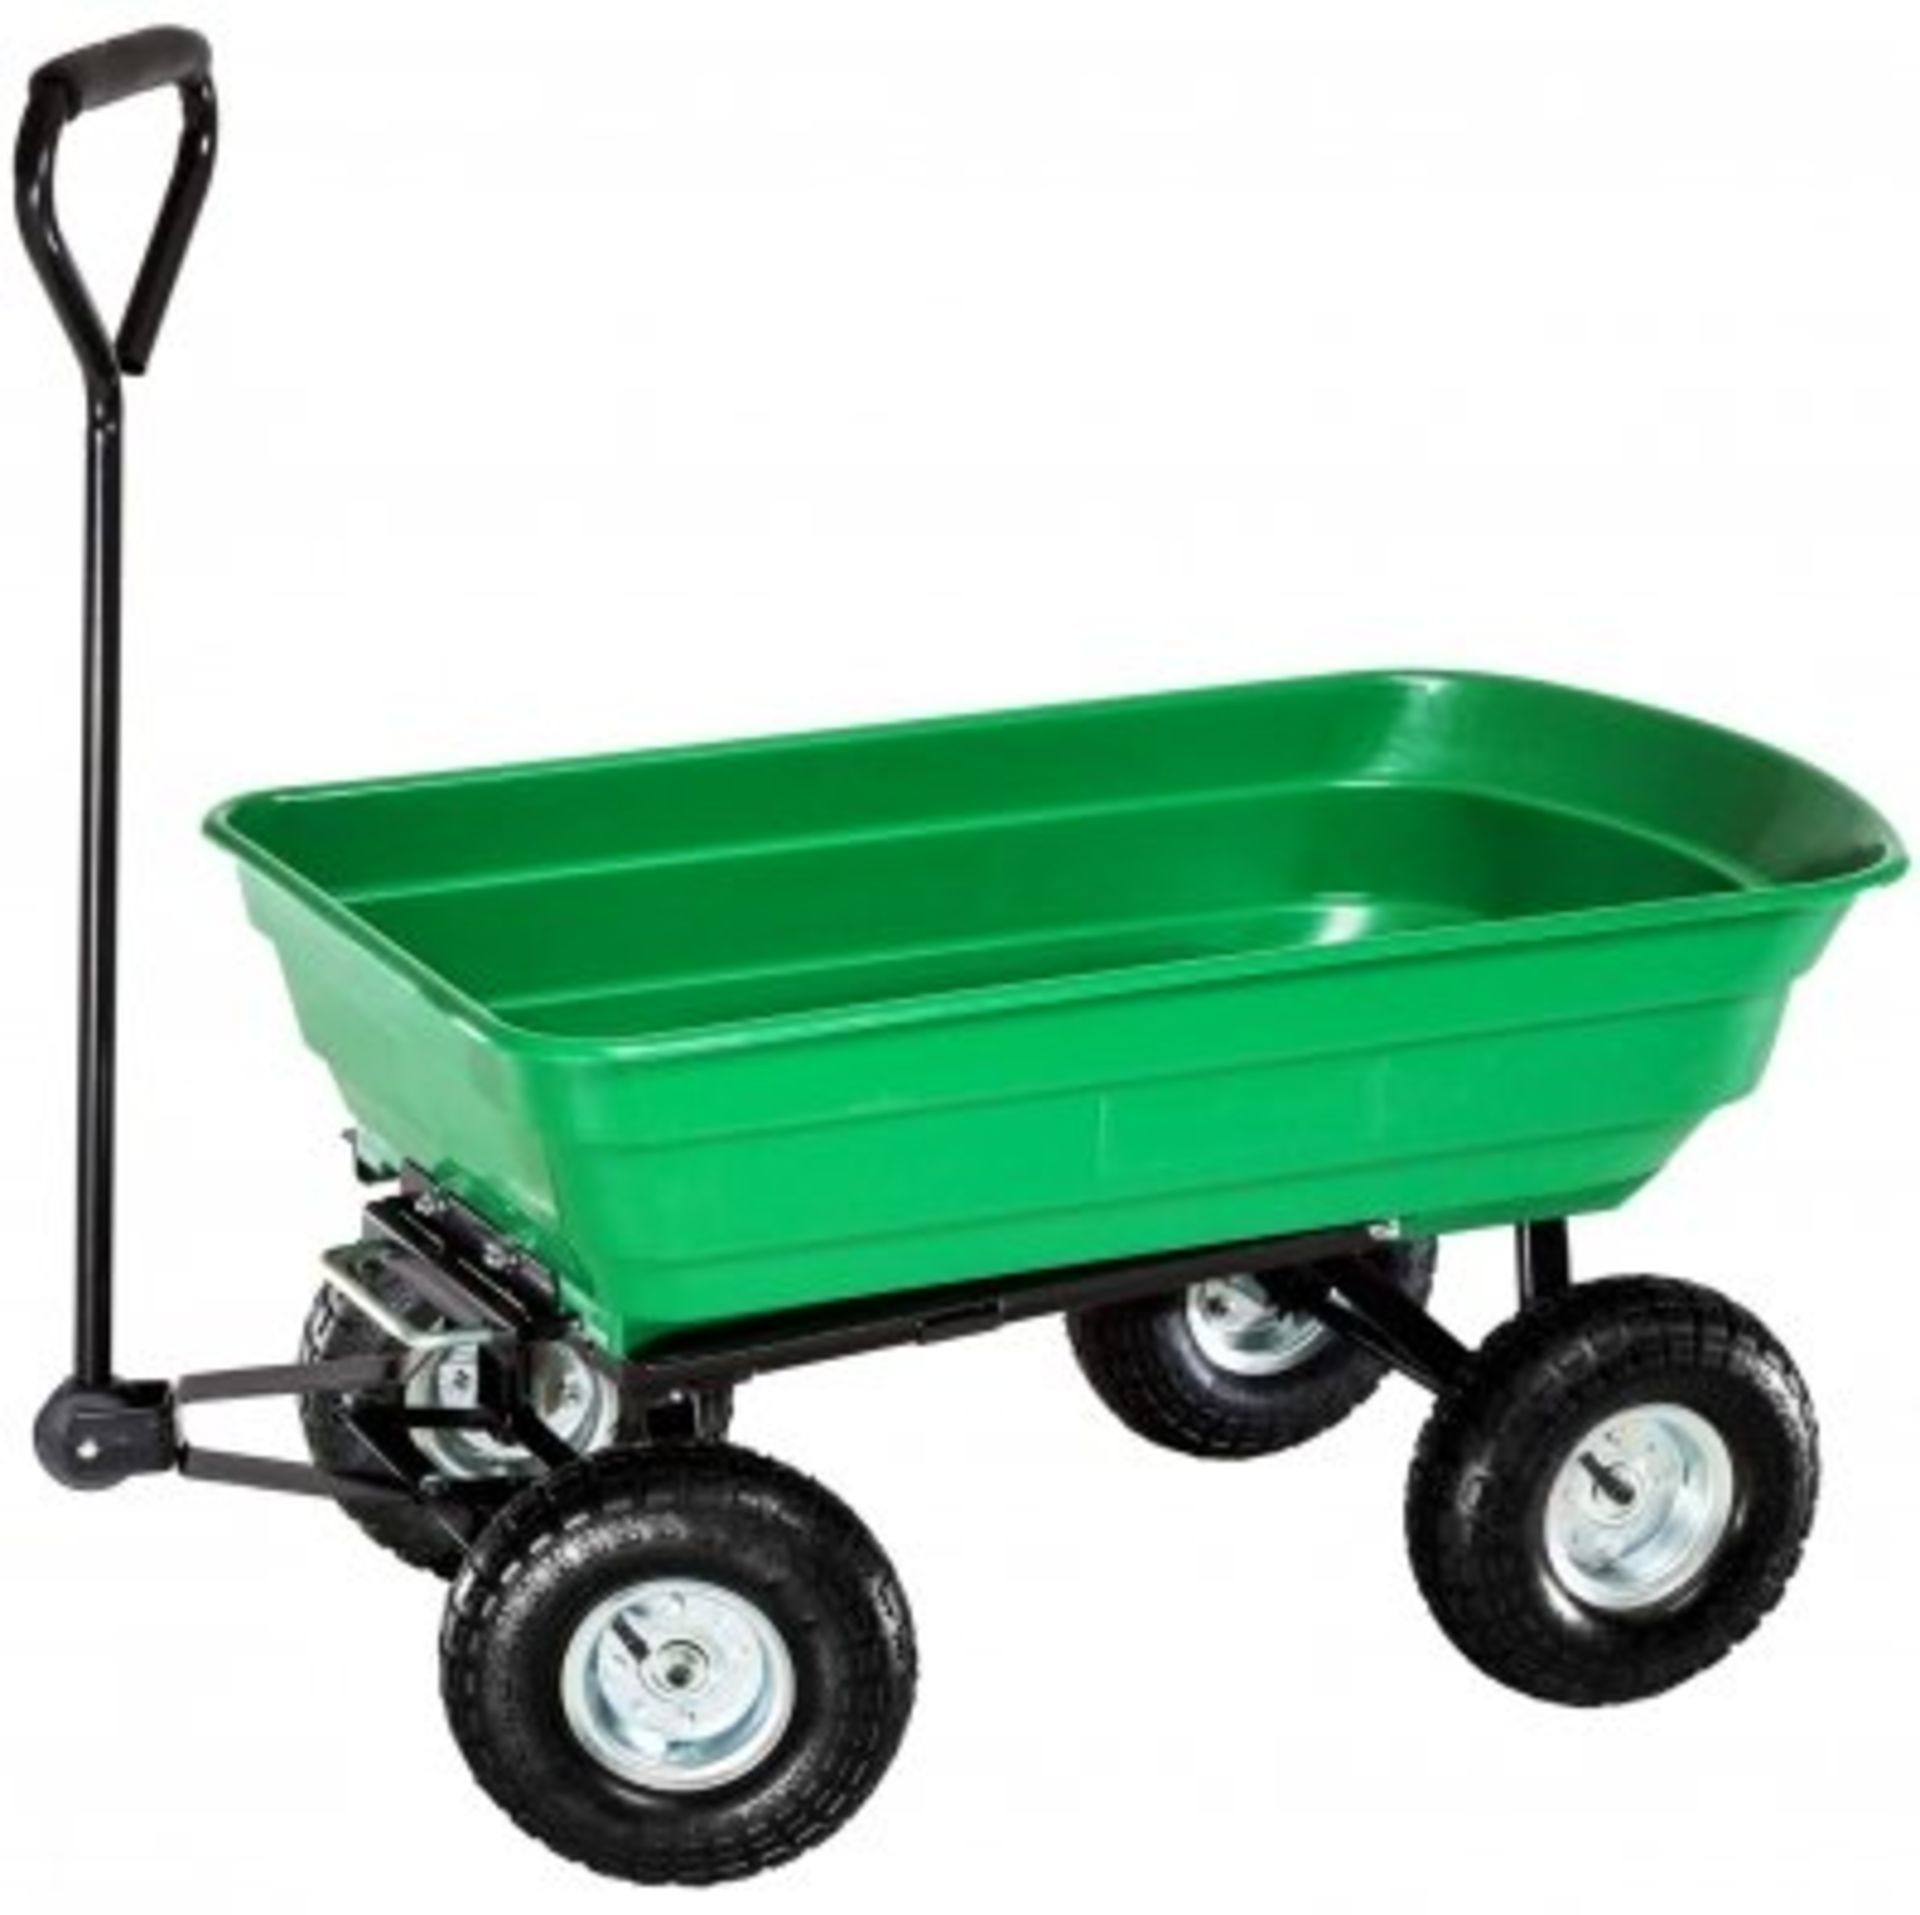 (RU248) Garden Tipping Barrow. This ultimate garden cart with tipping function will prove to be...